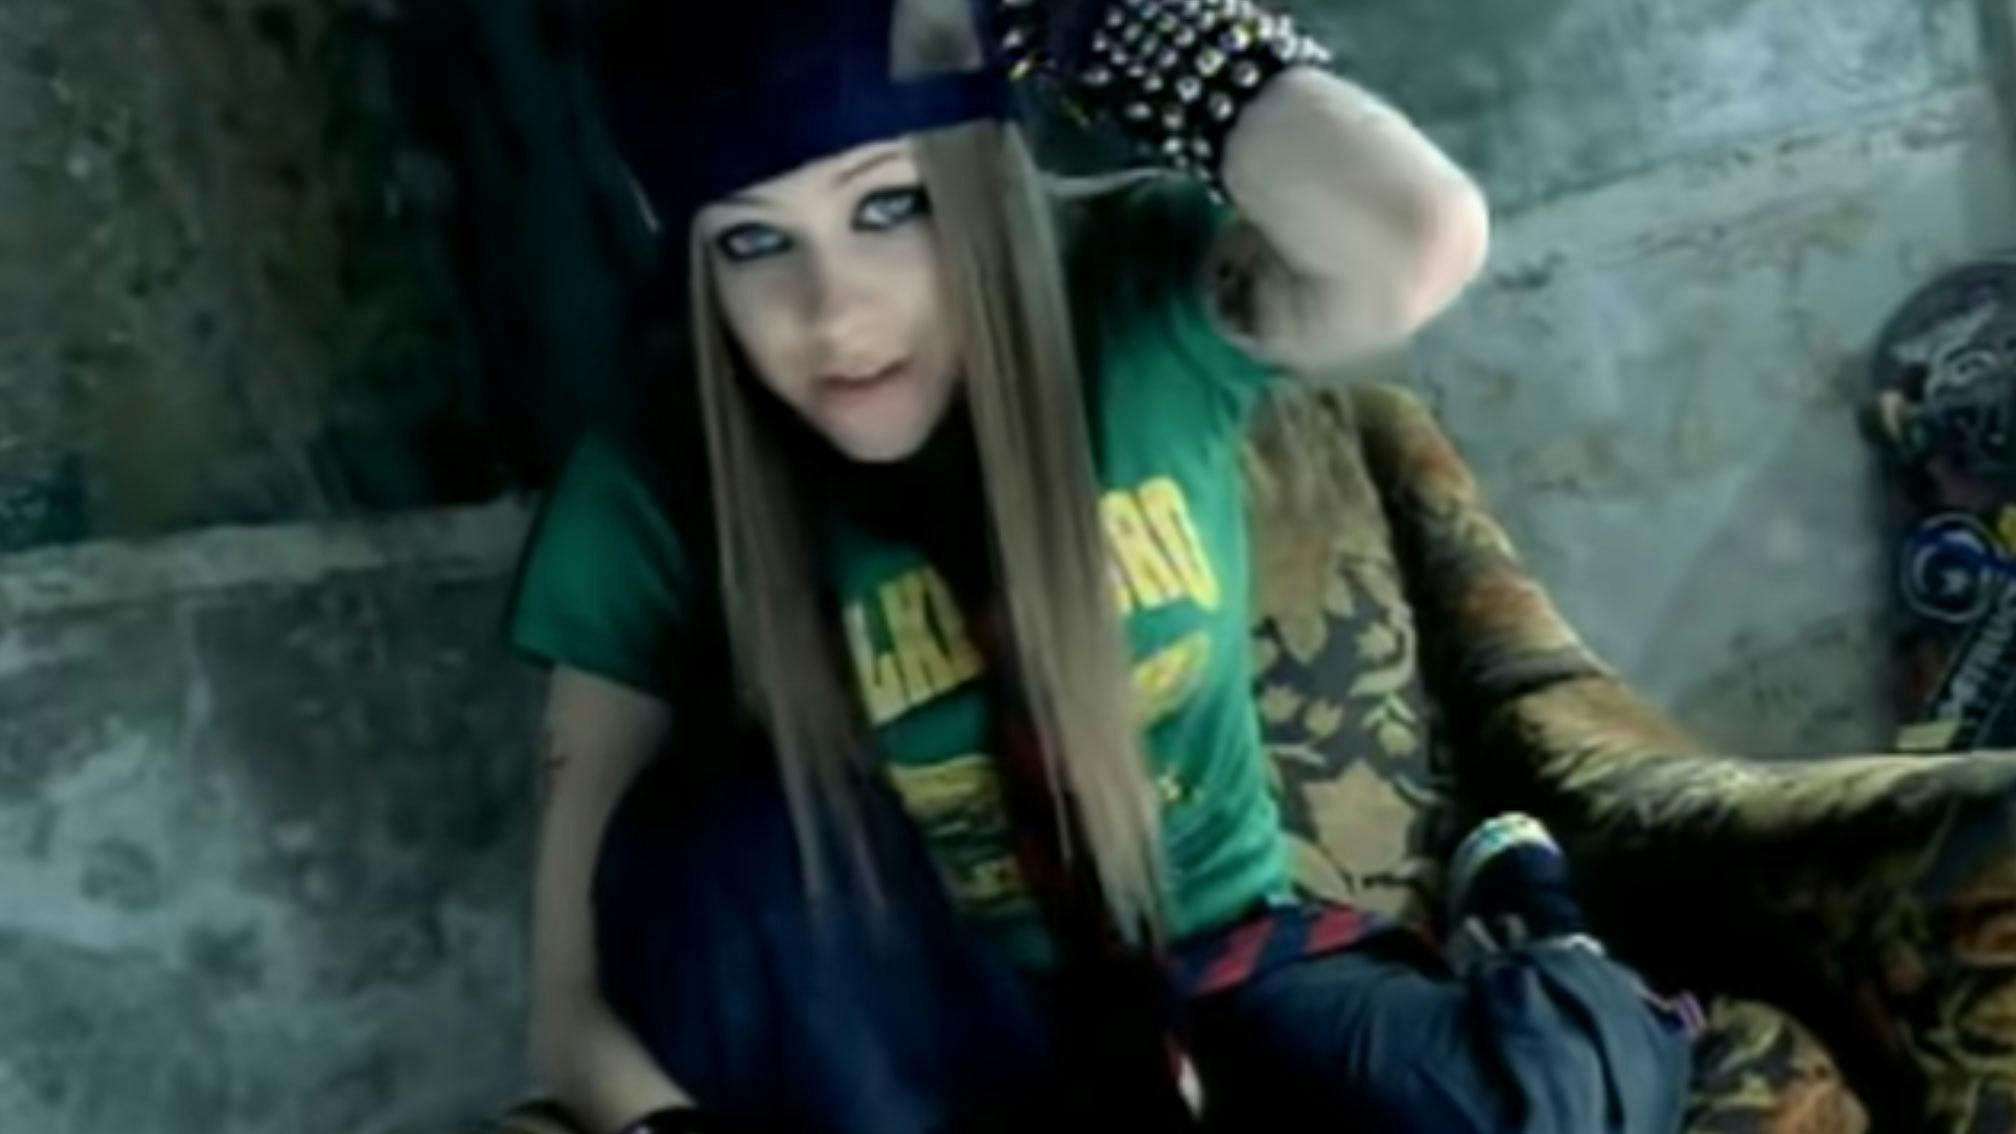 Avril Lavigne to turn Sk8er Boi into a film for song’s 20th anniversary